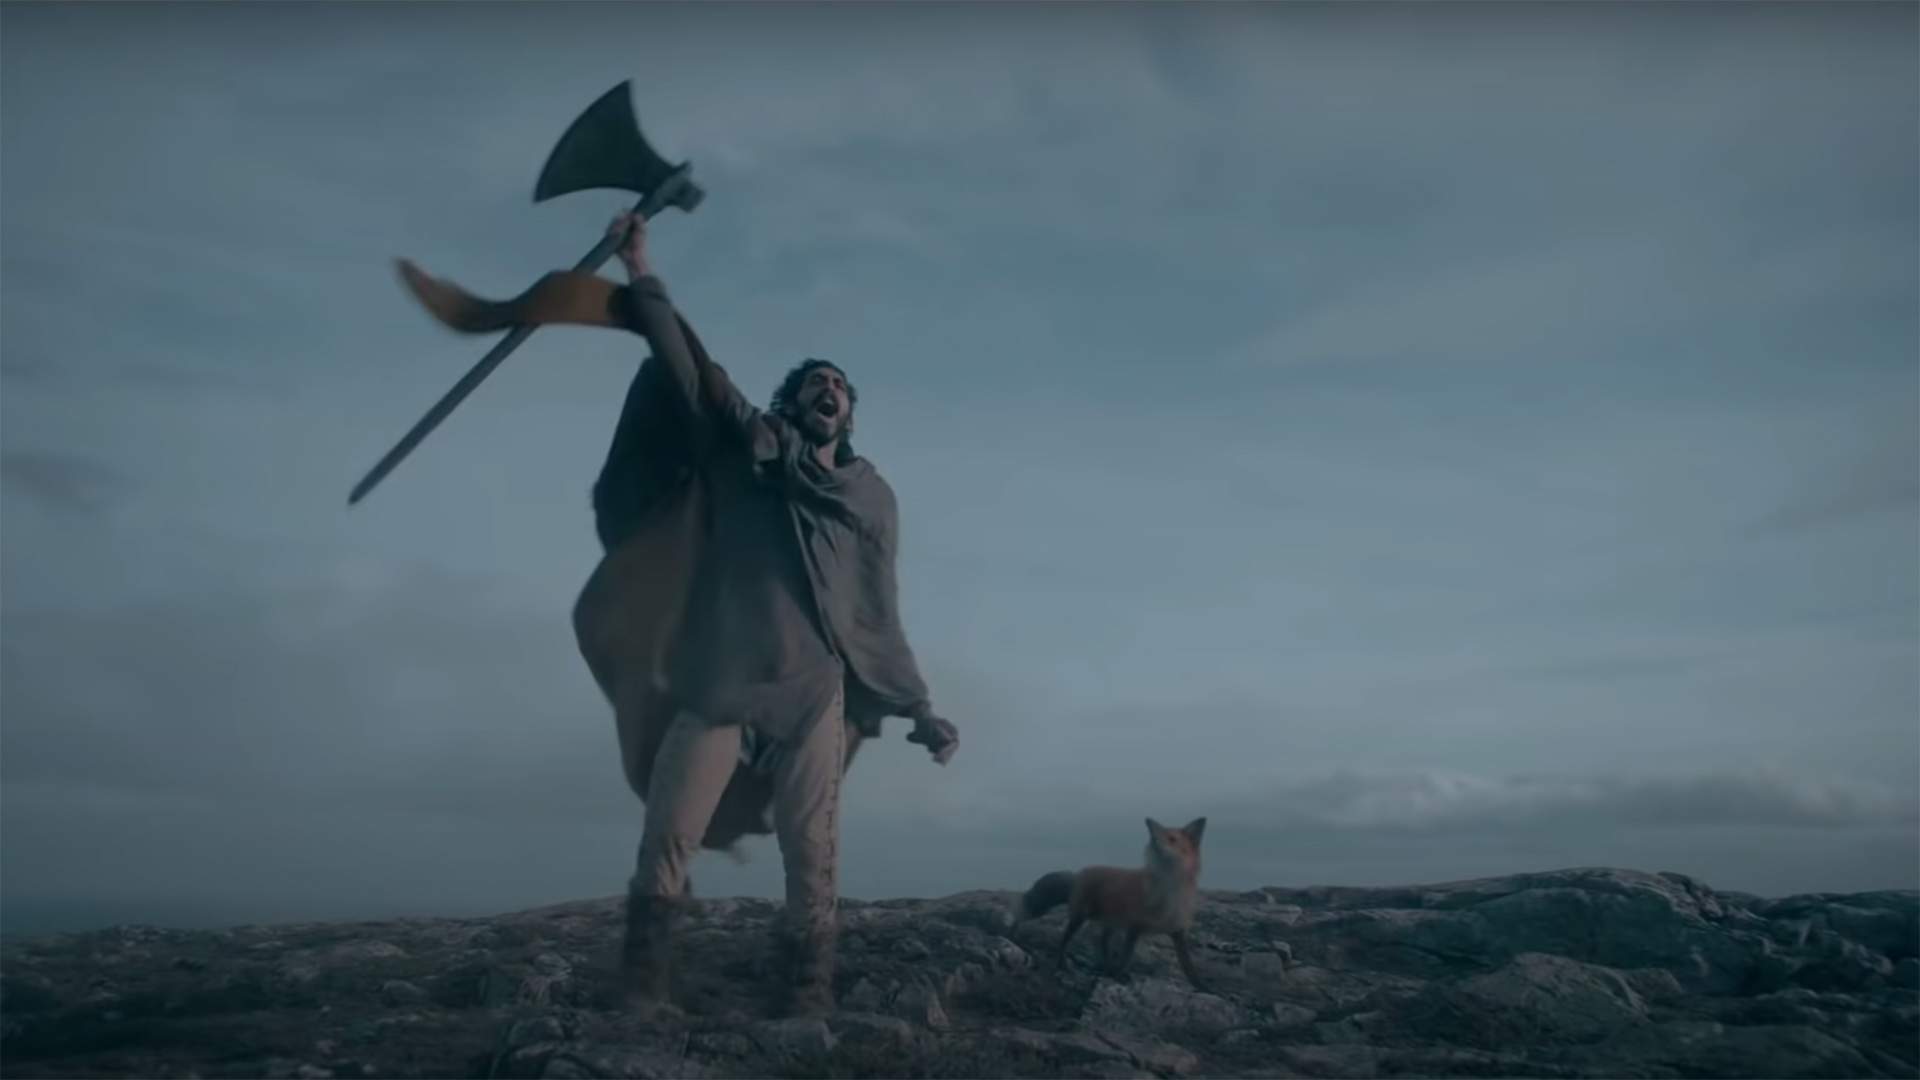 The New Trailer for 'The Green Knight' Pits an Axe-Swinging Dev Patel Against an Eerie Giant